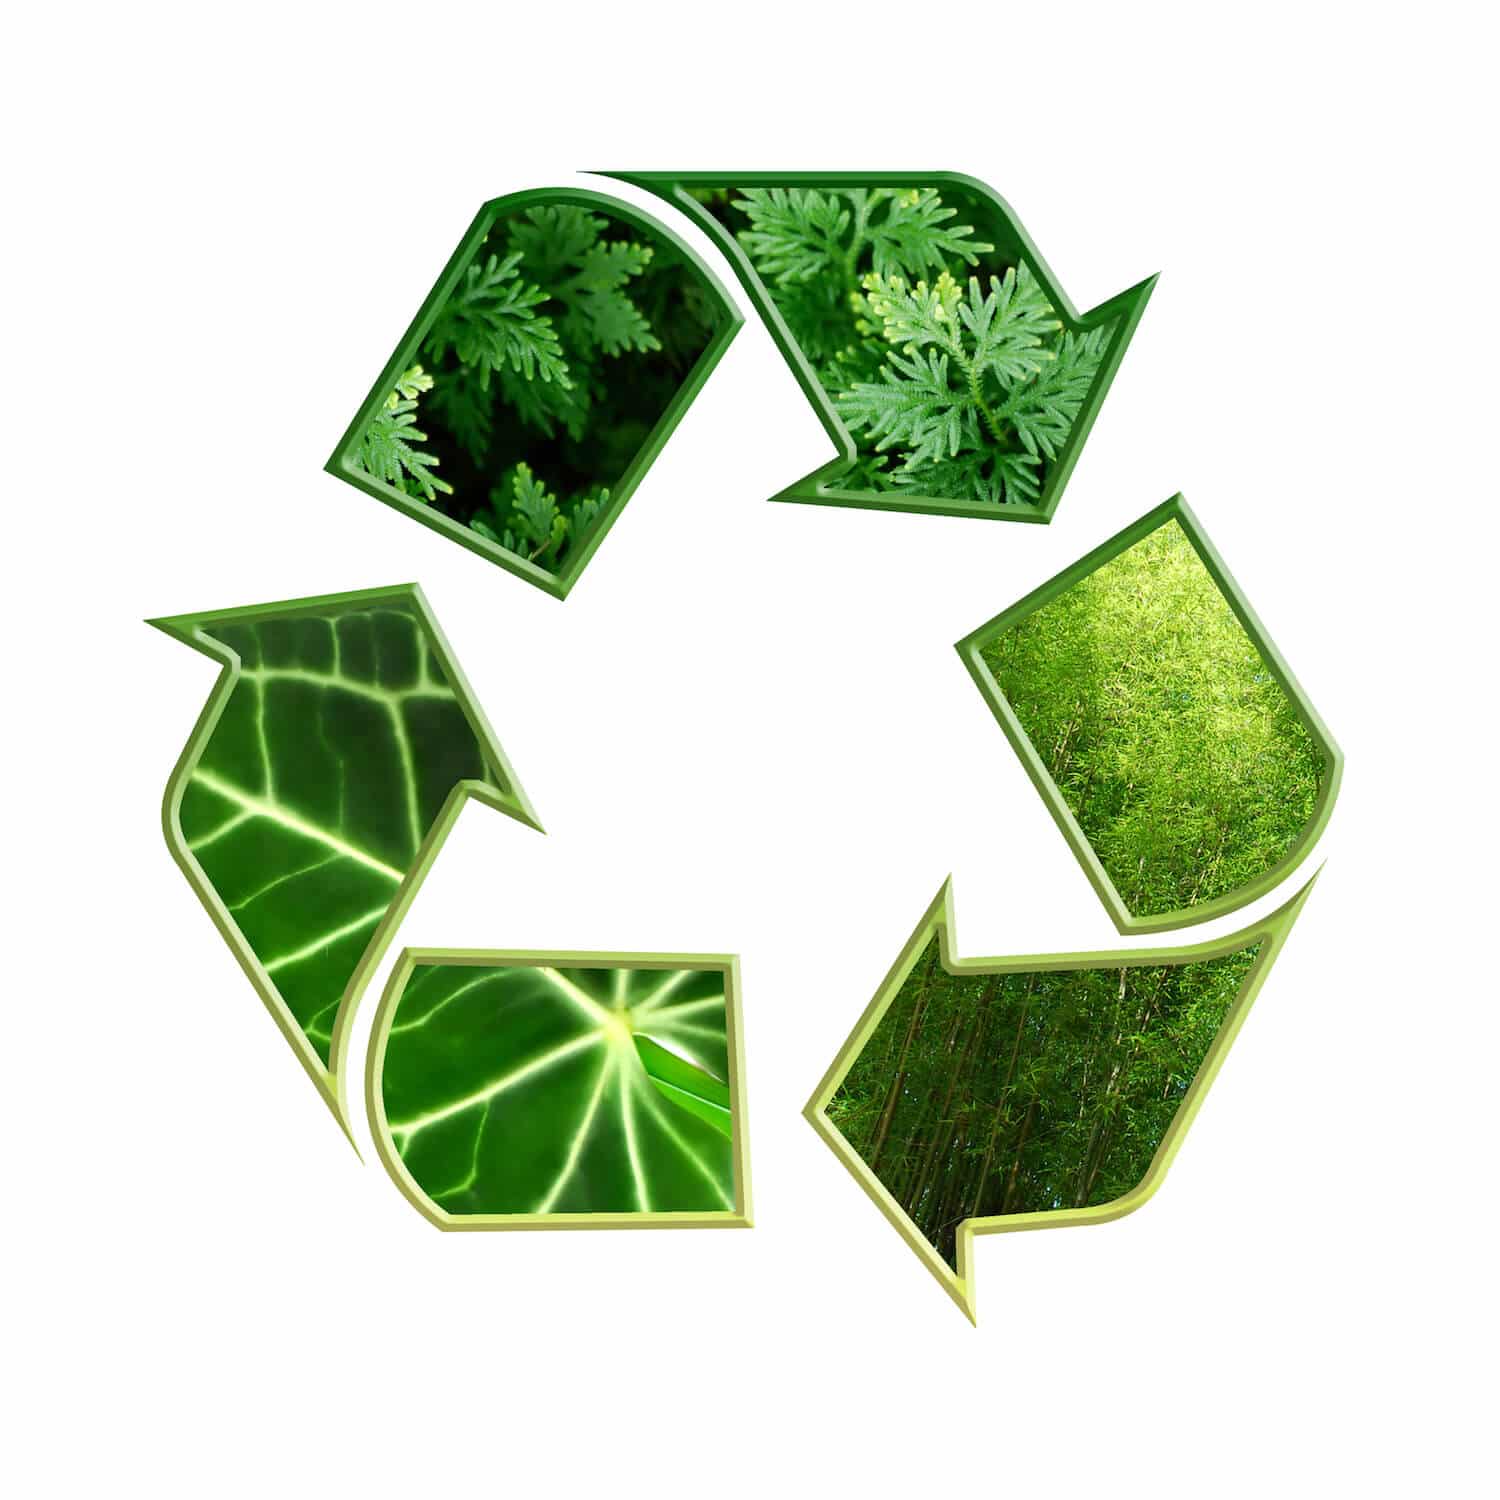 | Looking For An Environmentally Friendly Printer In Central Florida? Minuteman Press Longwood Provides Quality Work While Using The Best Eco-Friendly Products Possible!